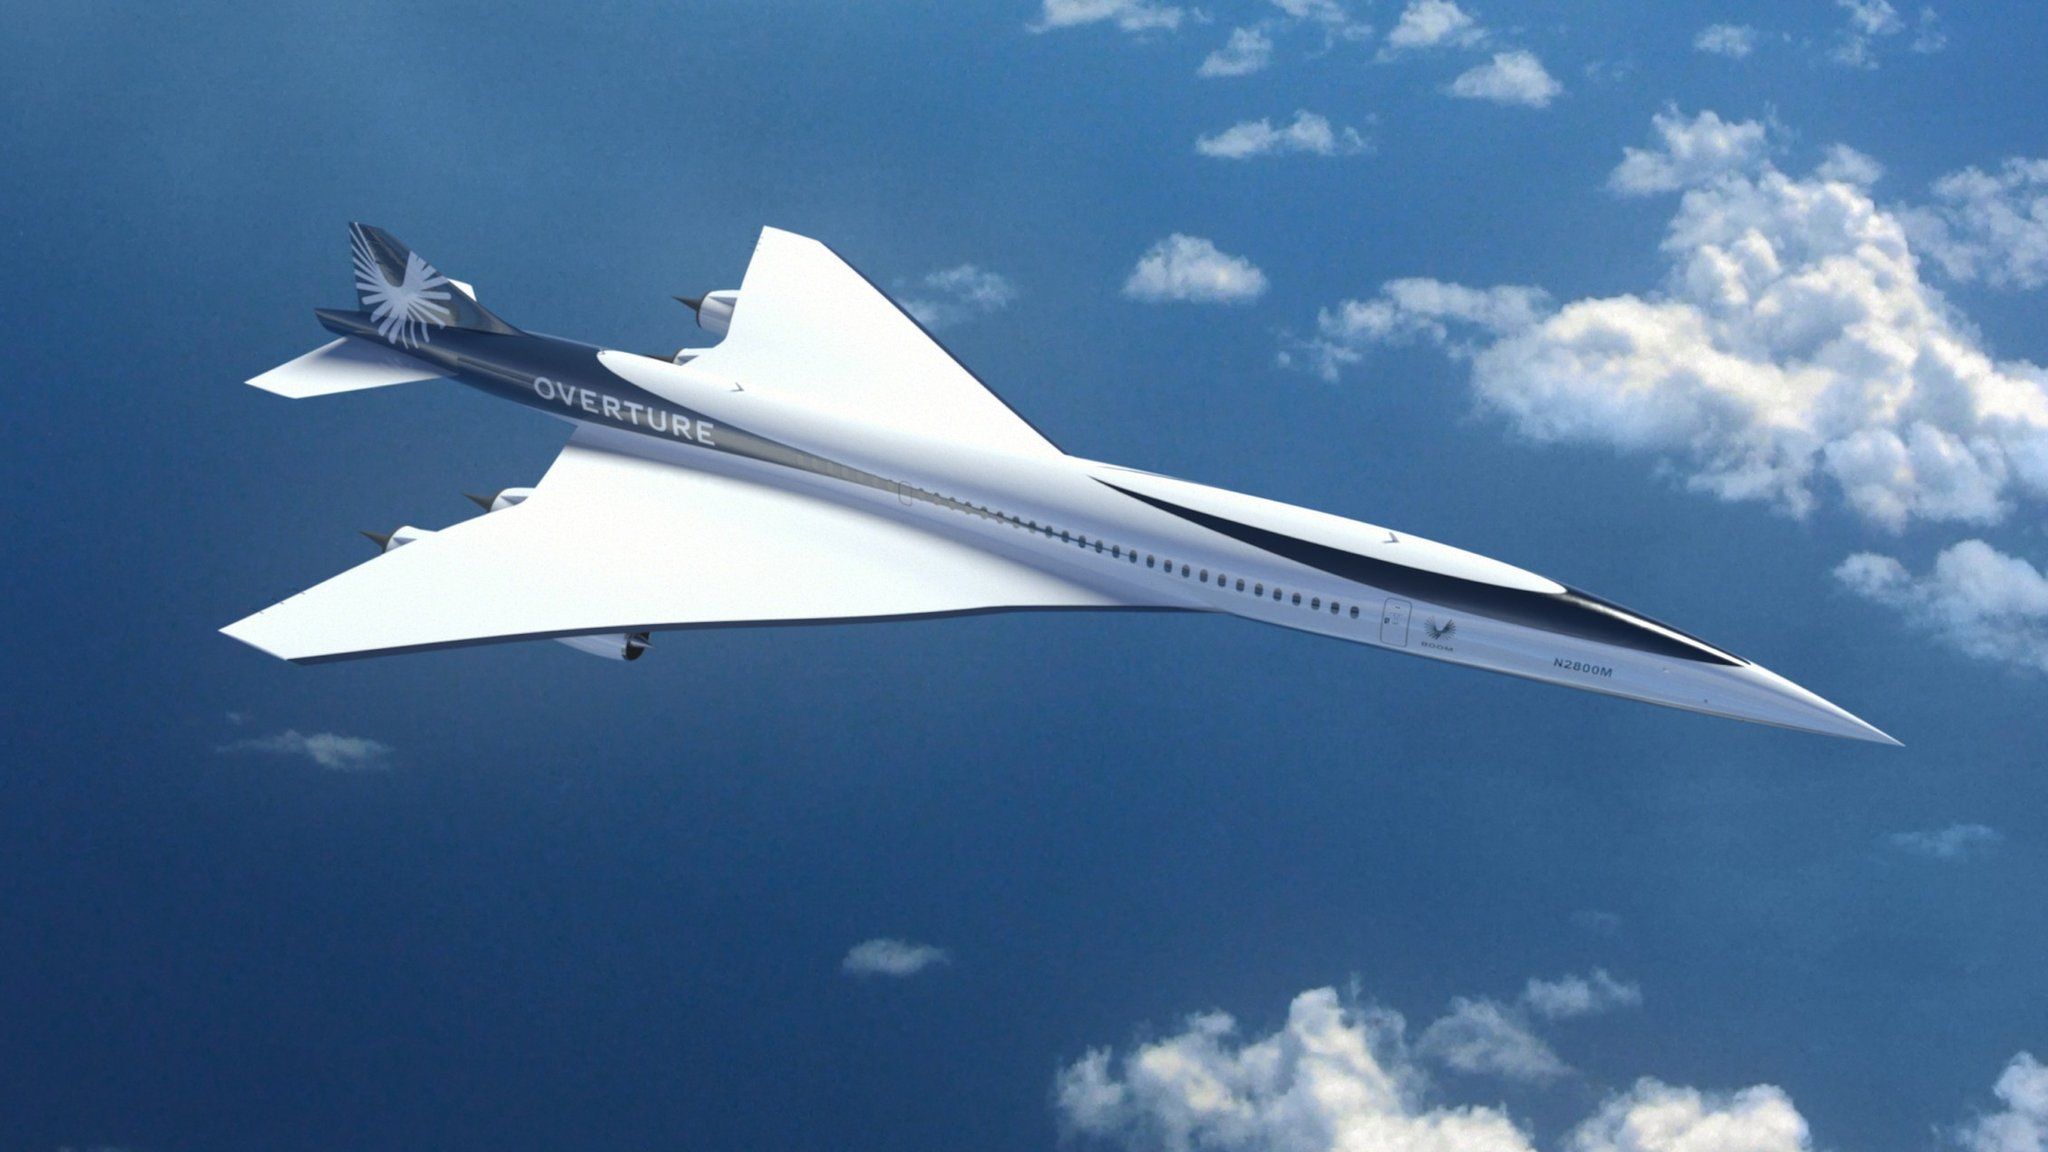 The plane nicknamed 'Son Of Concorde' will fly from London to New York in just 3.5 hours